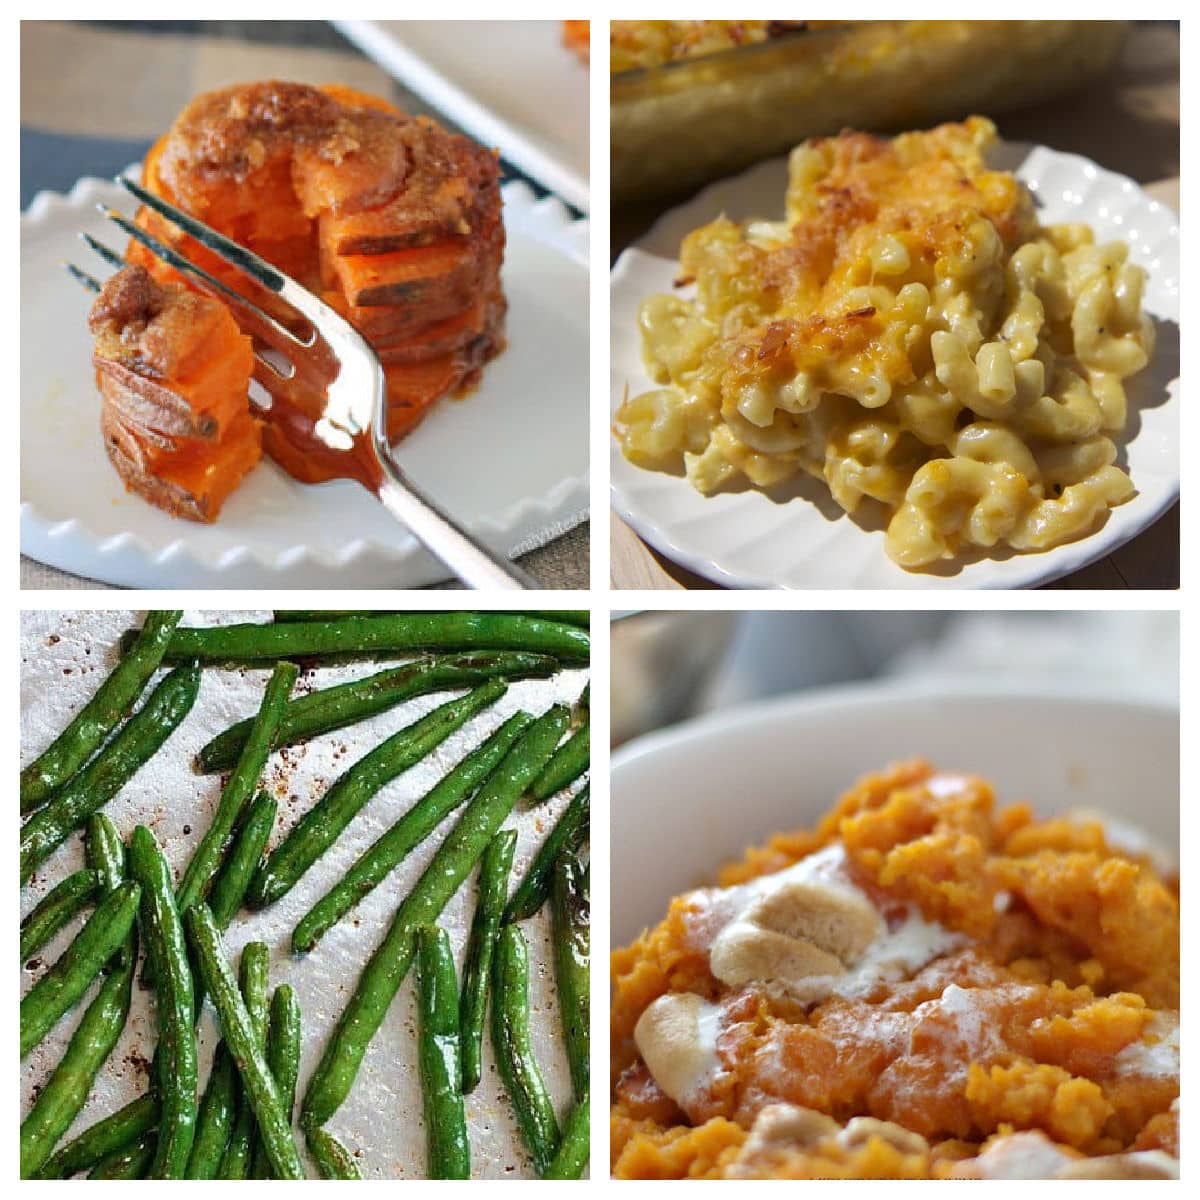 Collage of Weight Watchers dishes for Thanksgiving.